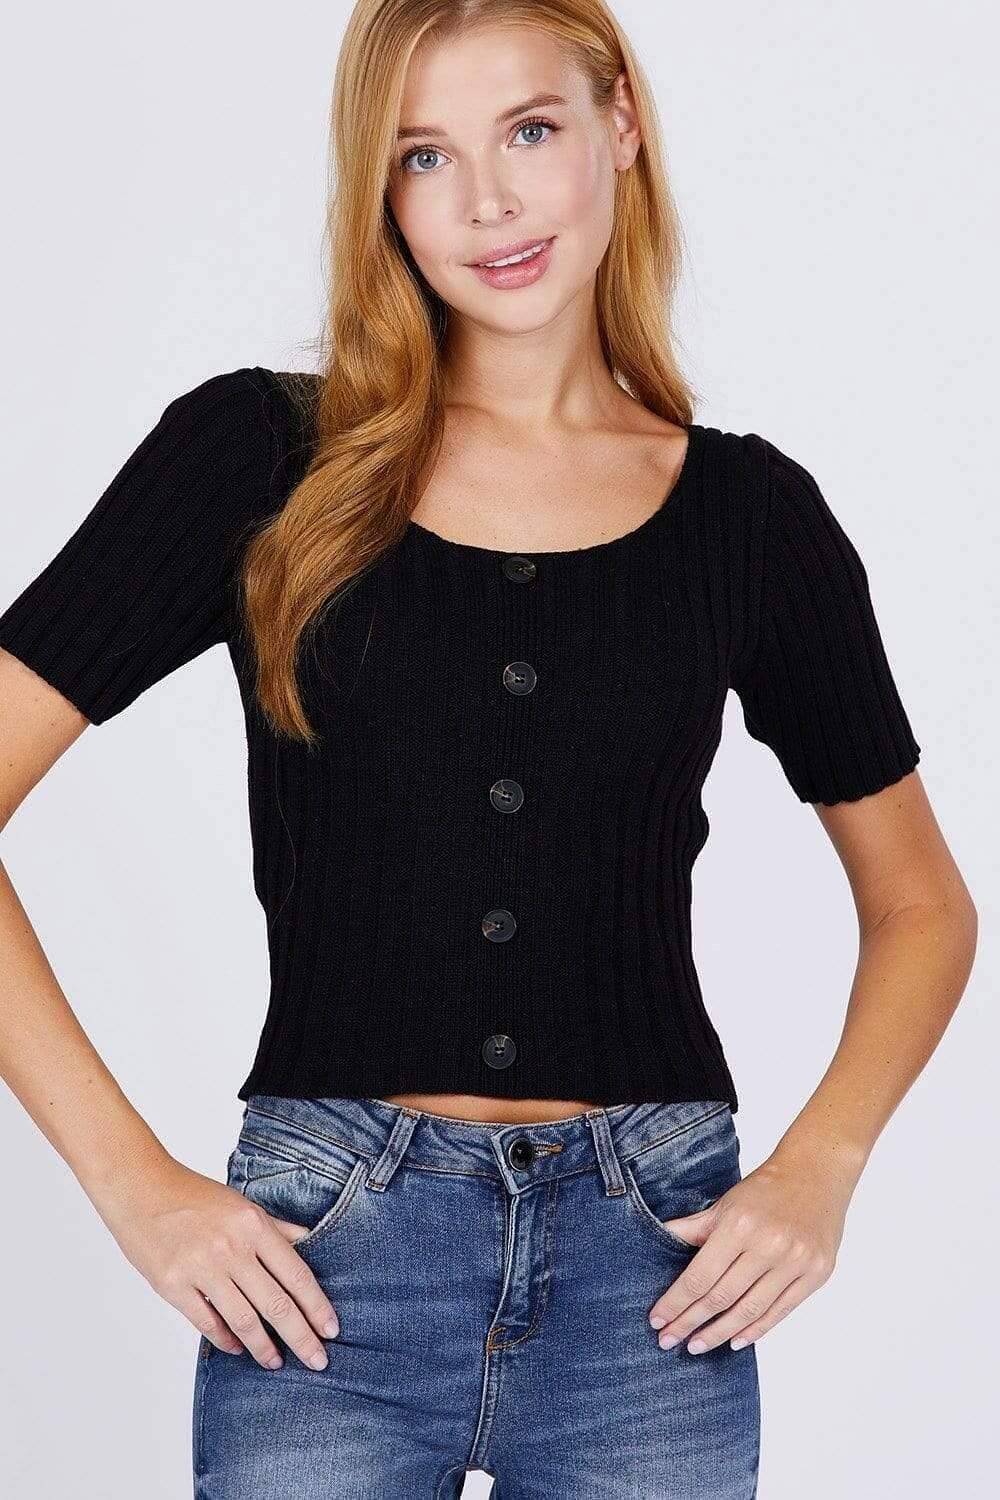 Black Short Sleeve Rib Knitted Sweater - Shopping Therapy, LLC Top